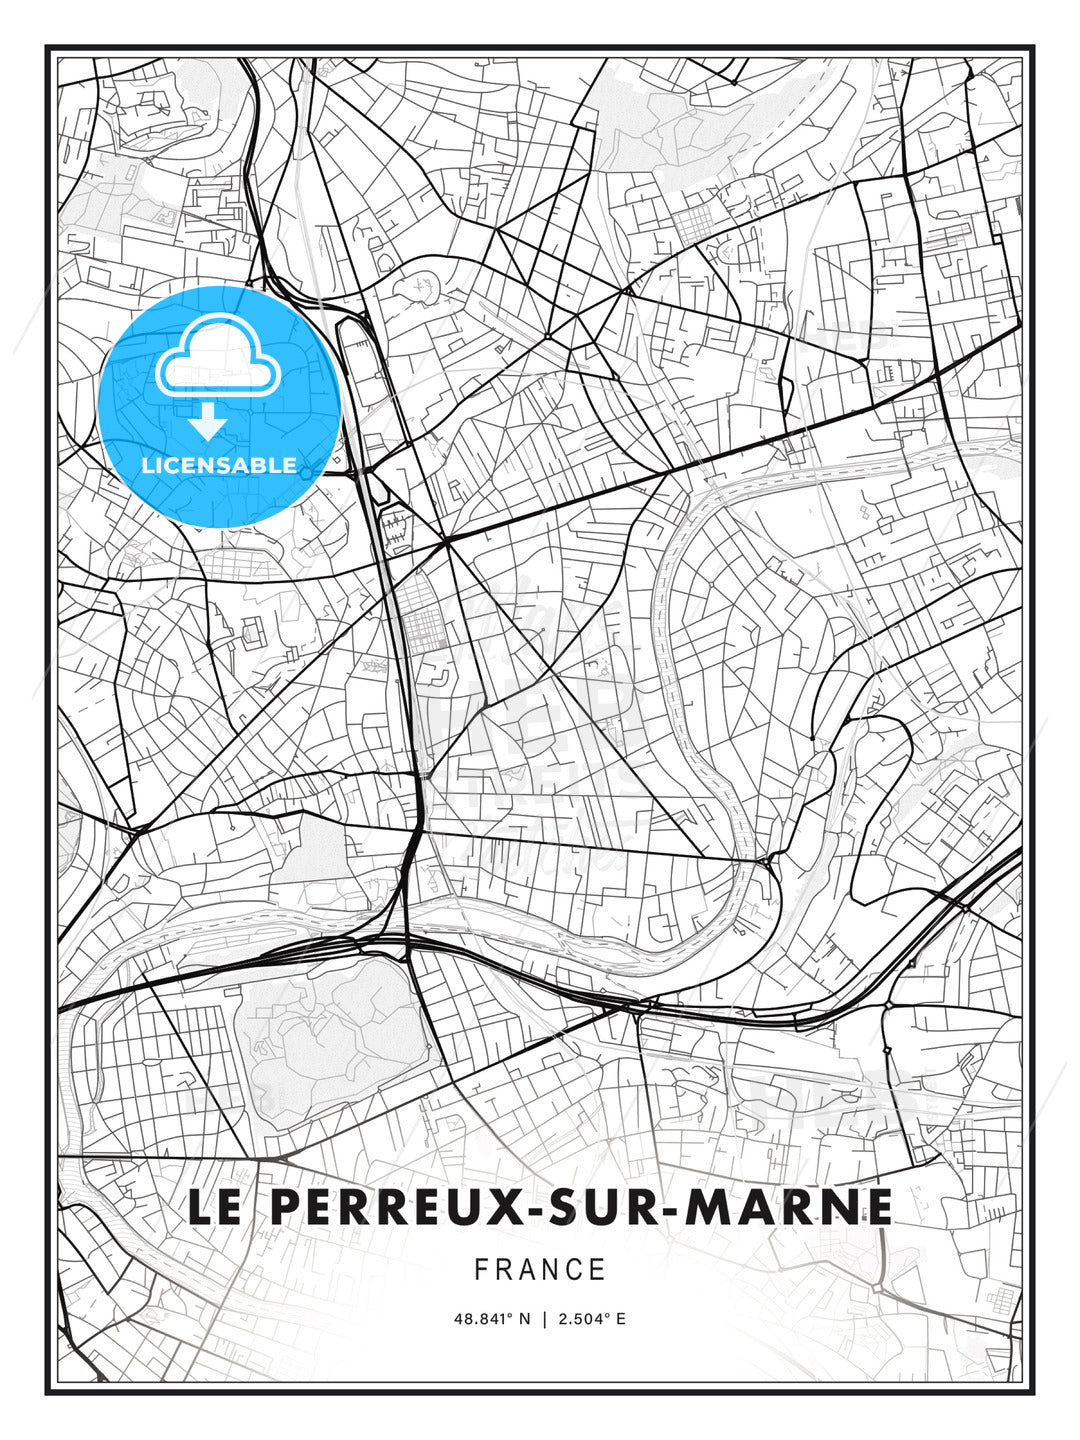 Le Perreux-sur-Marne, France, Modern Print Template in Various Formats - HEBSTREITS Sketches